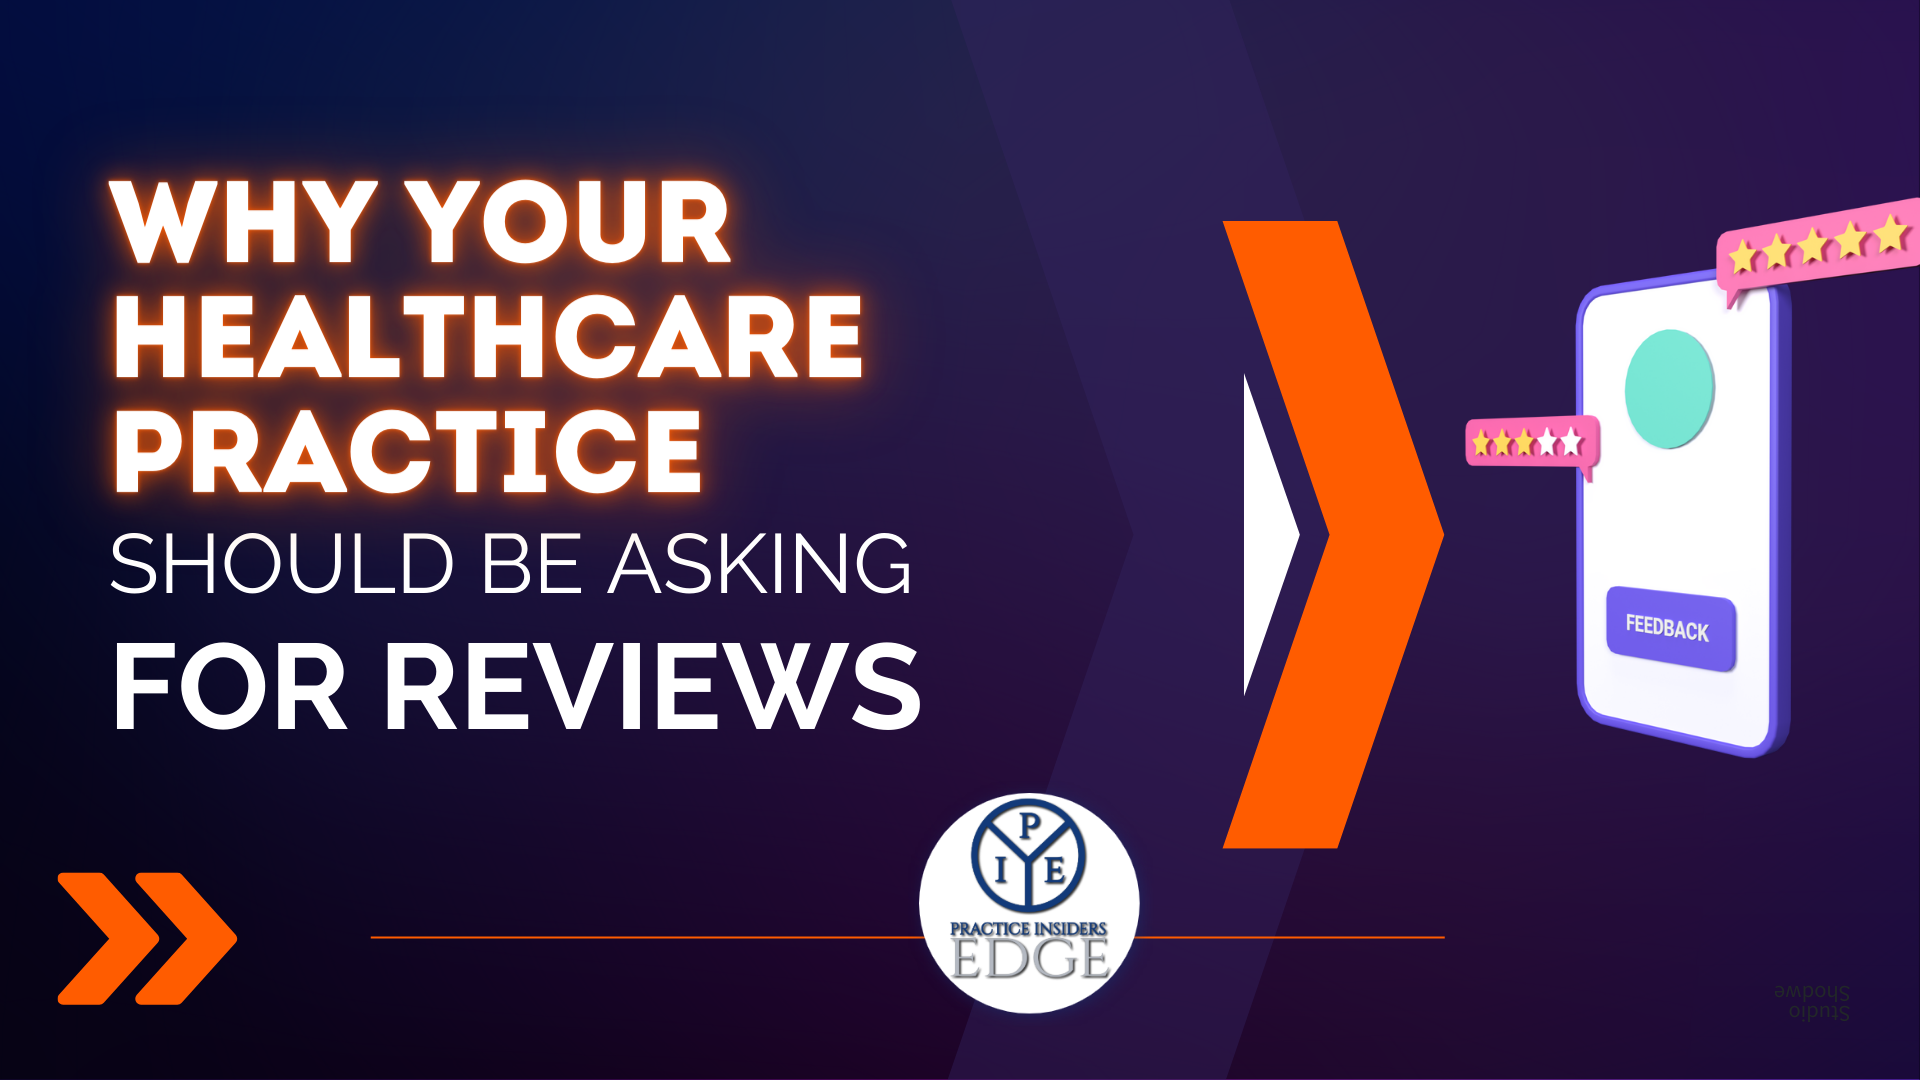 Why Your Healthcare Practice Should Be Asking For Reviews